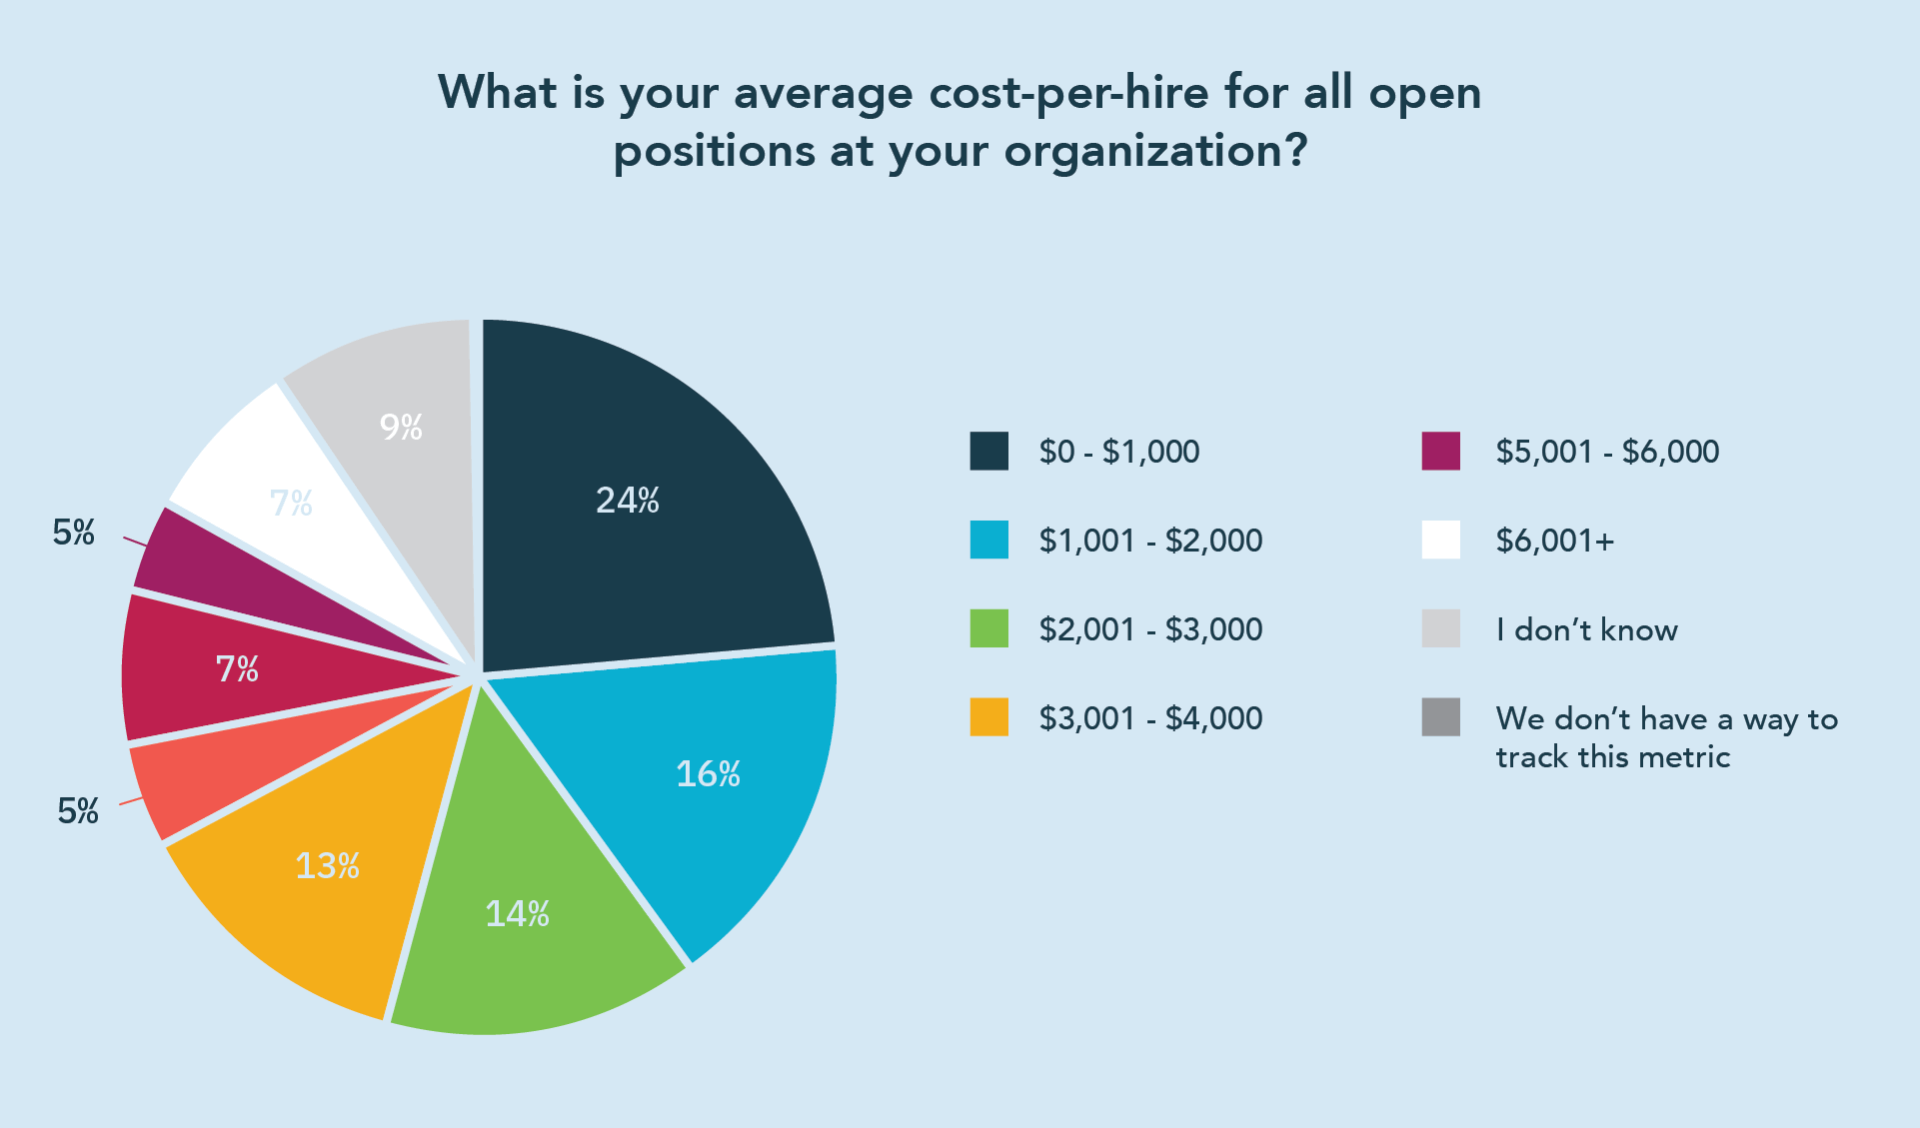 24% of companies estimated their average cost-per-hire for all open positions is $0-$1,000 while only 7% reported it was over $6,000